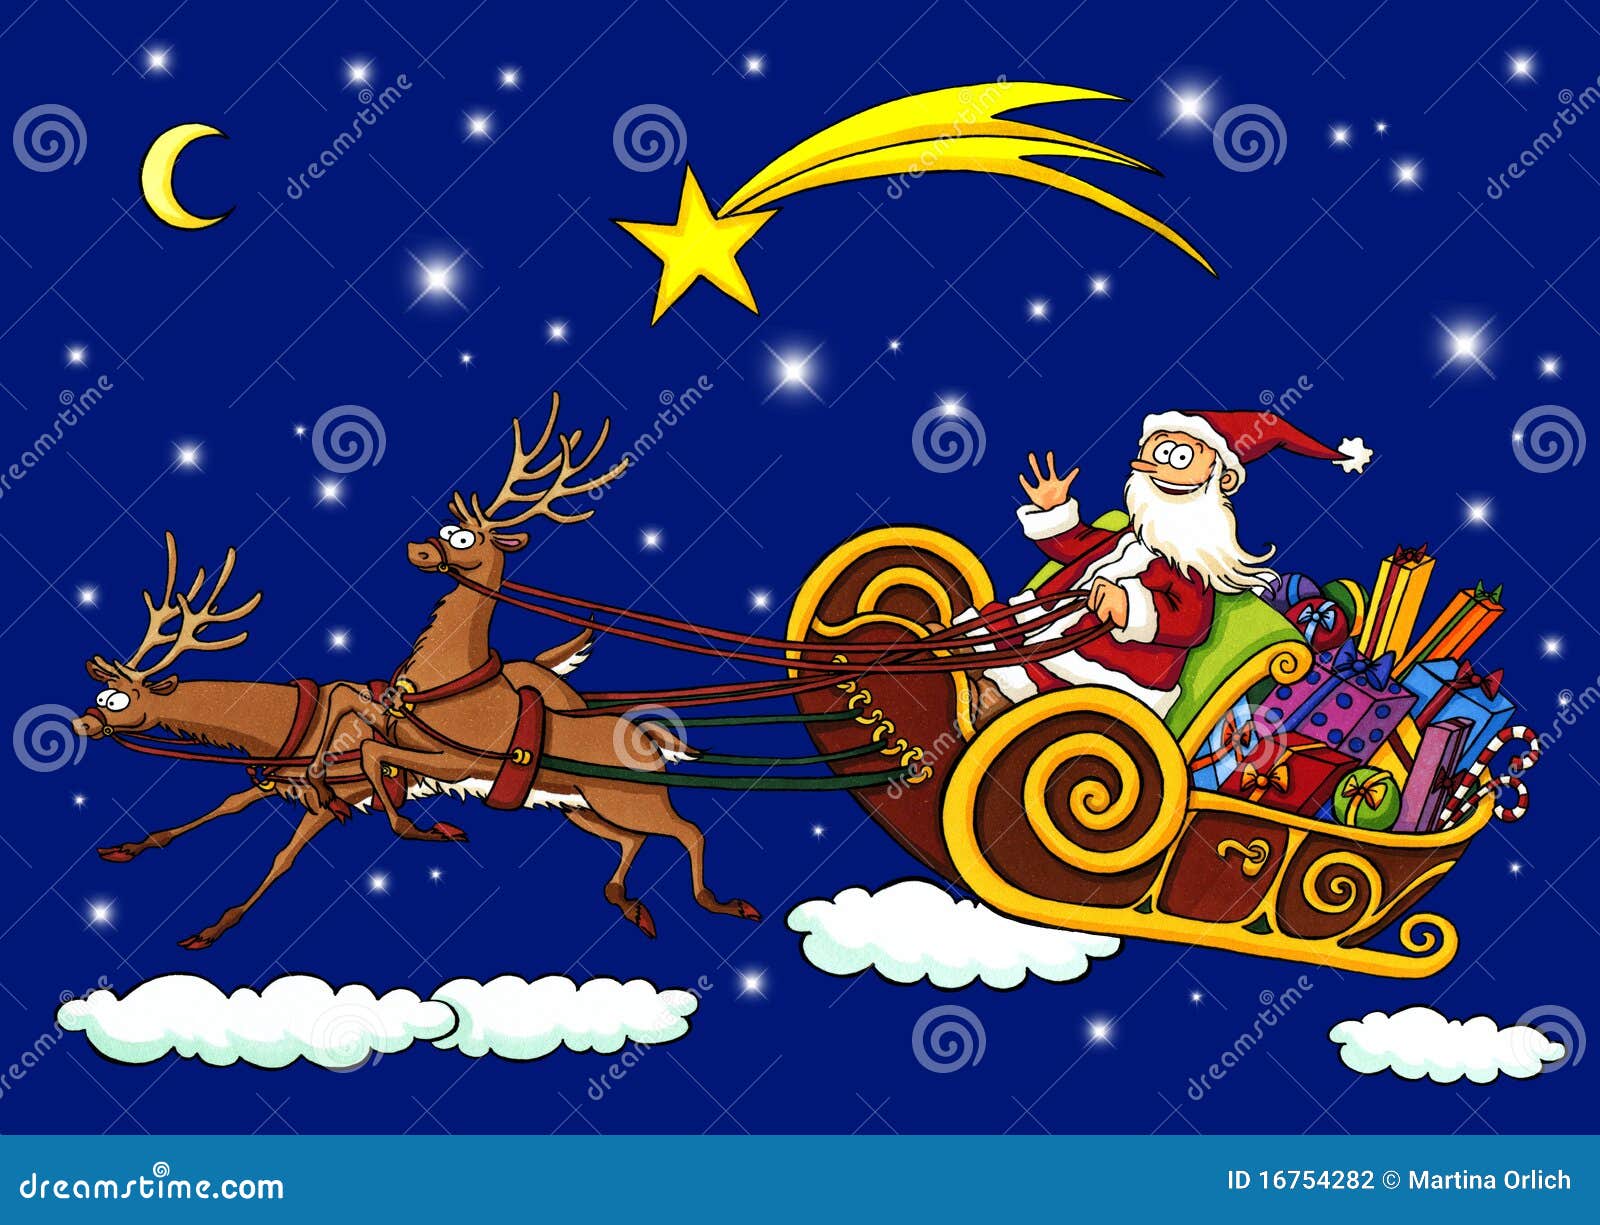 Santa Claus Flying Through The Night In A Sleigh Stock